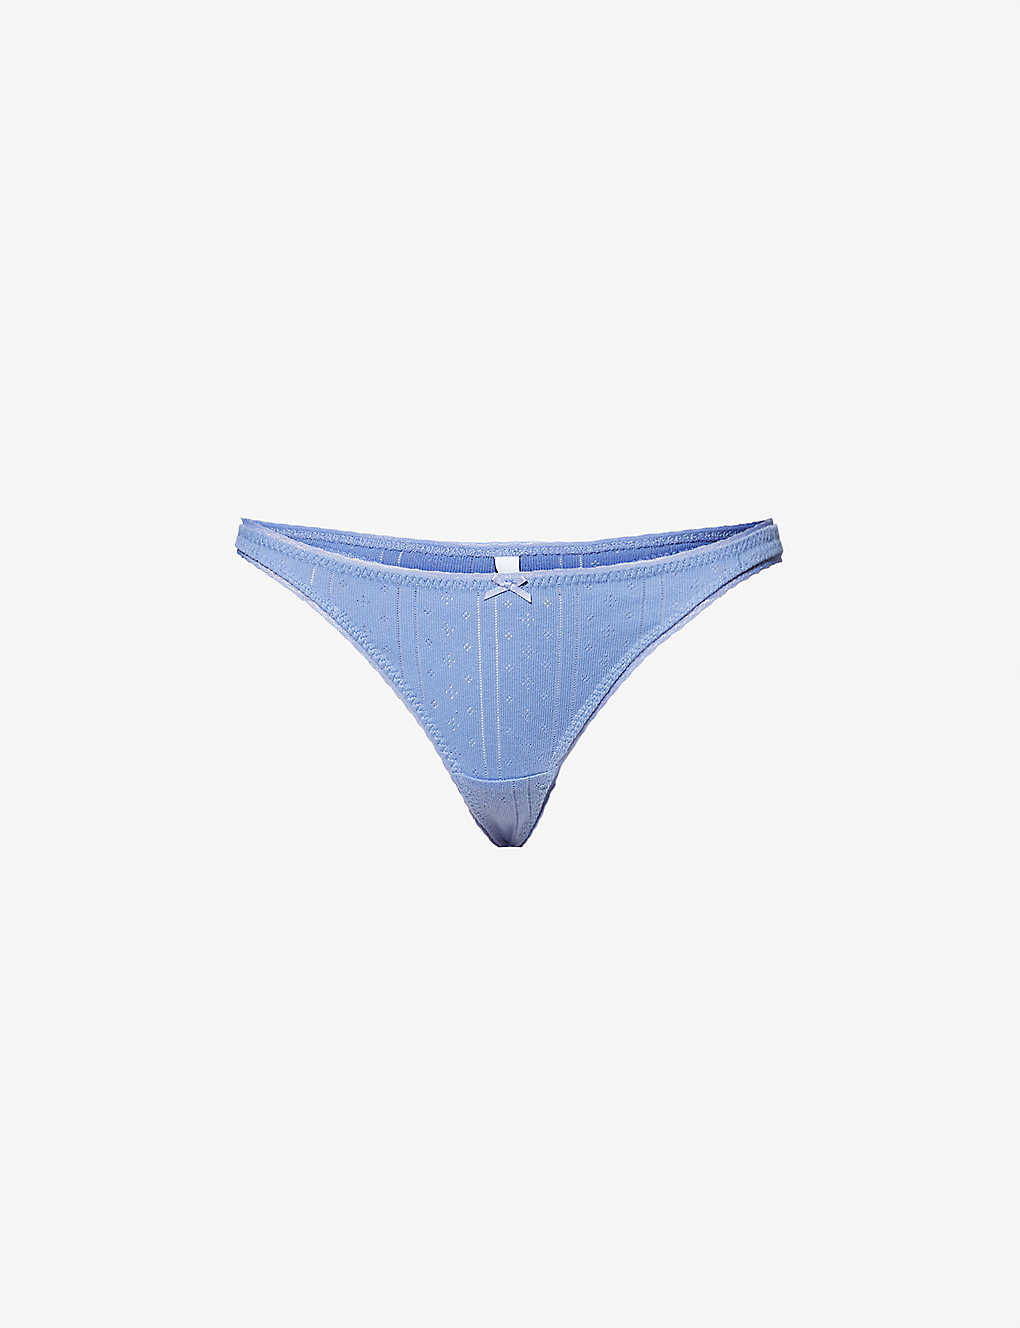 Cou Cou Intimates Womens French Blue Pointelle Mid-rise Organic-cotton Thong